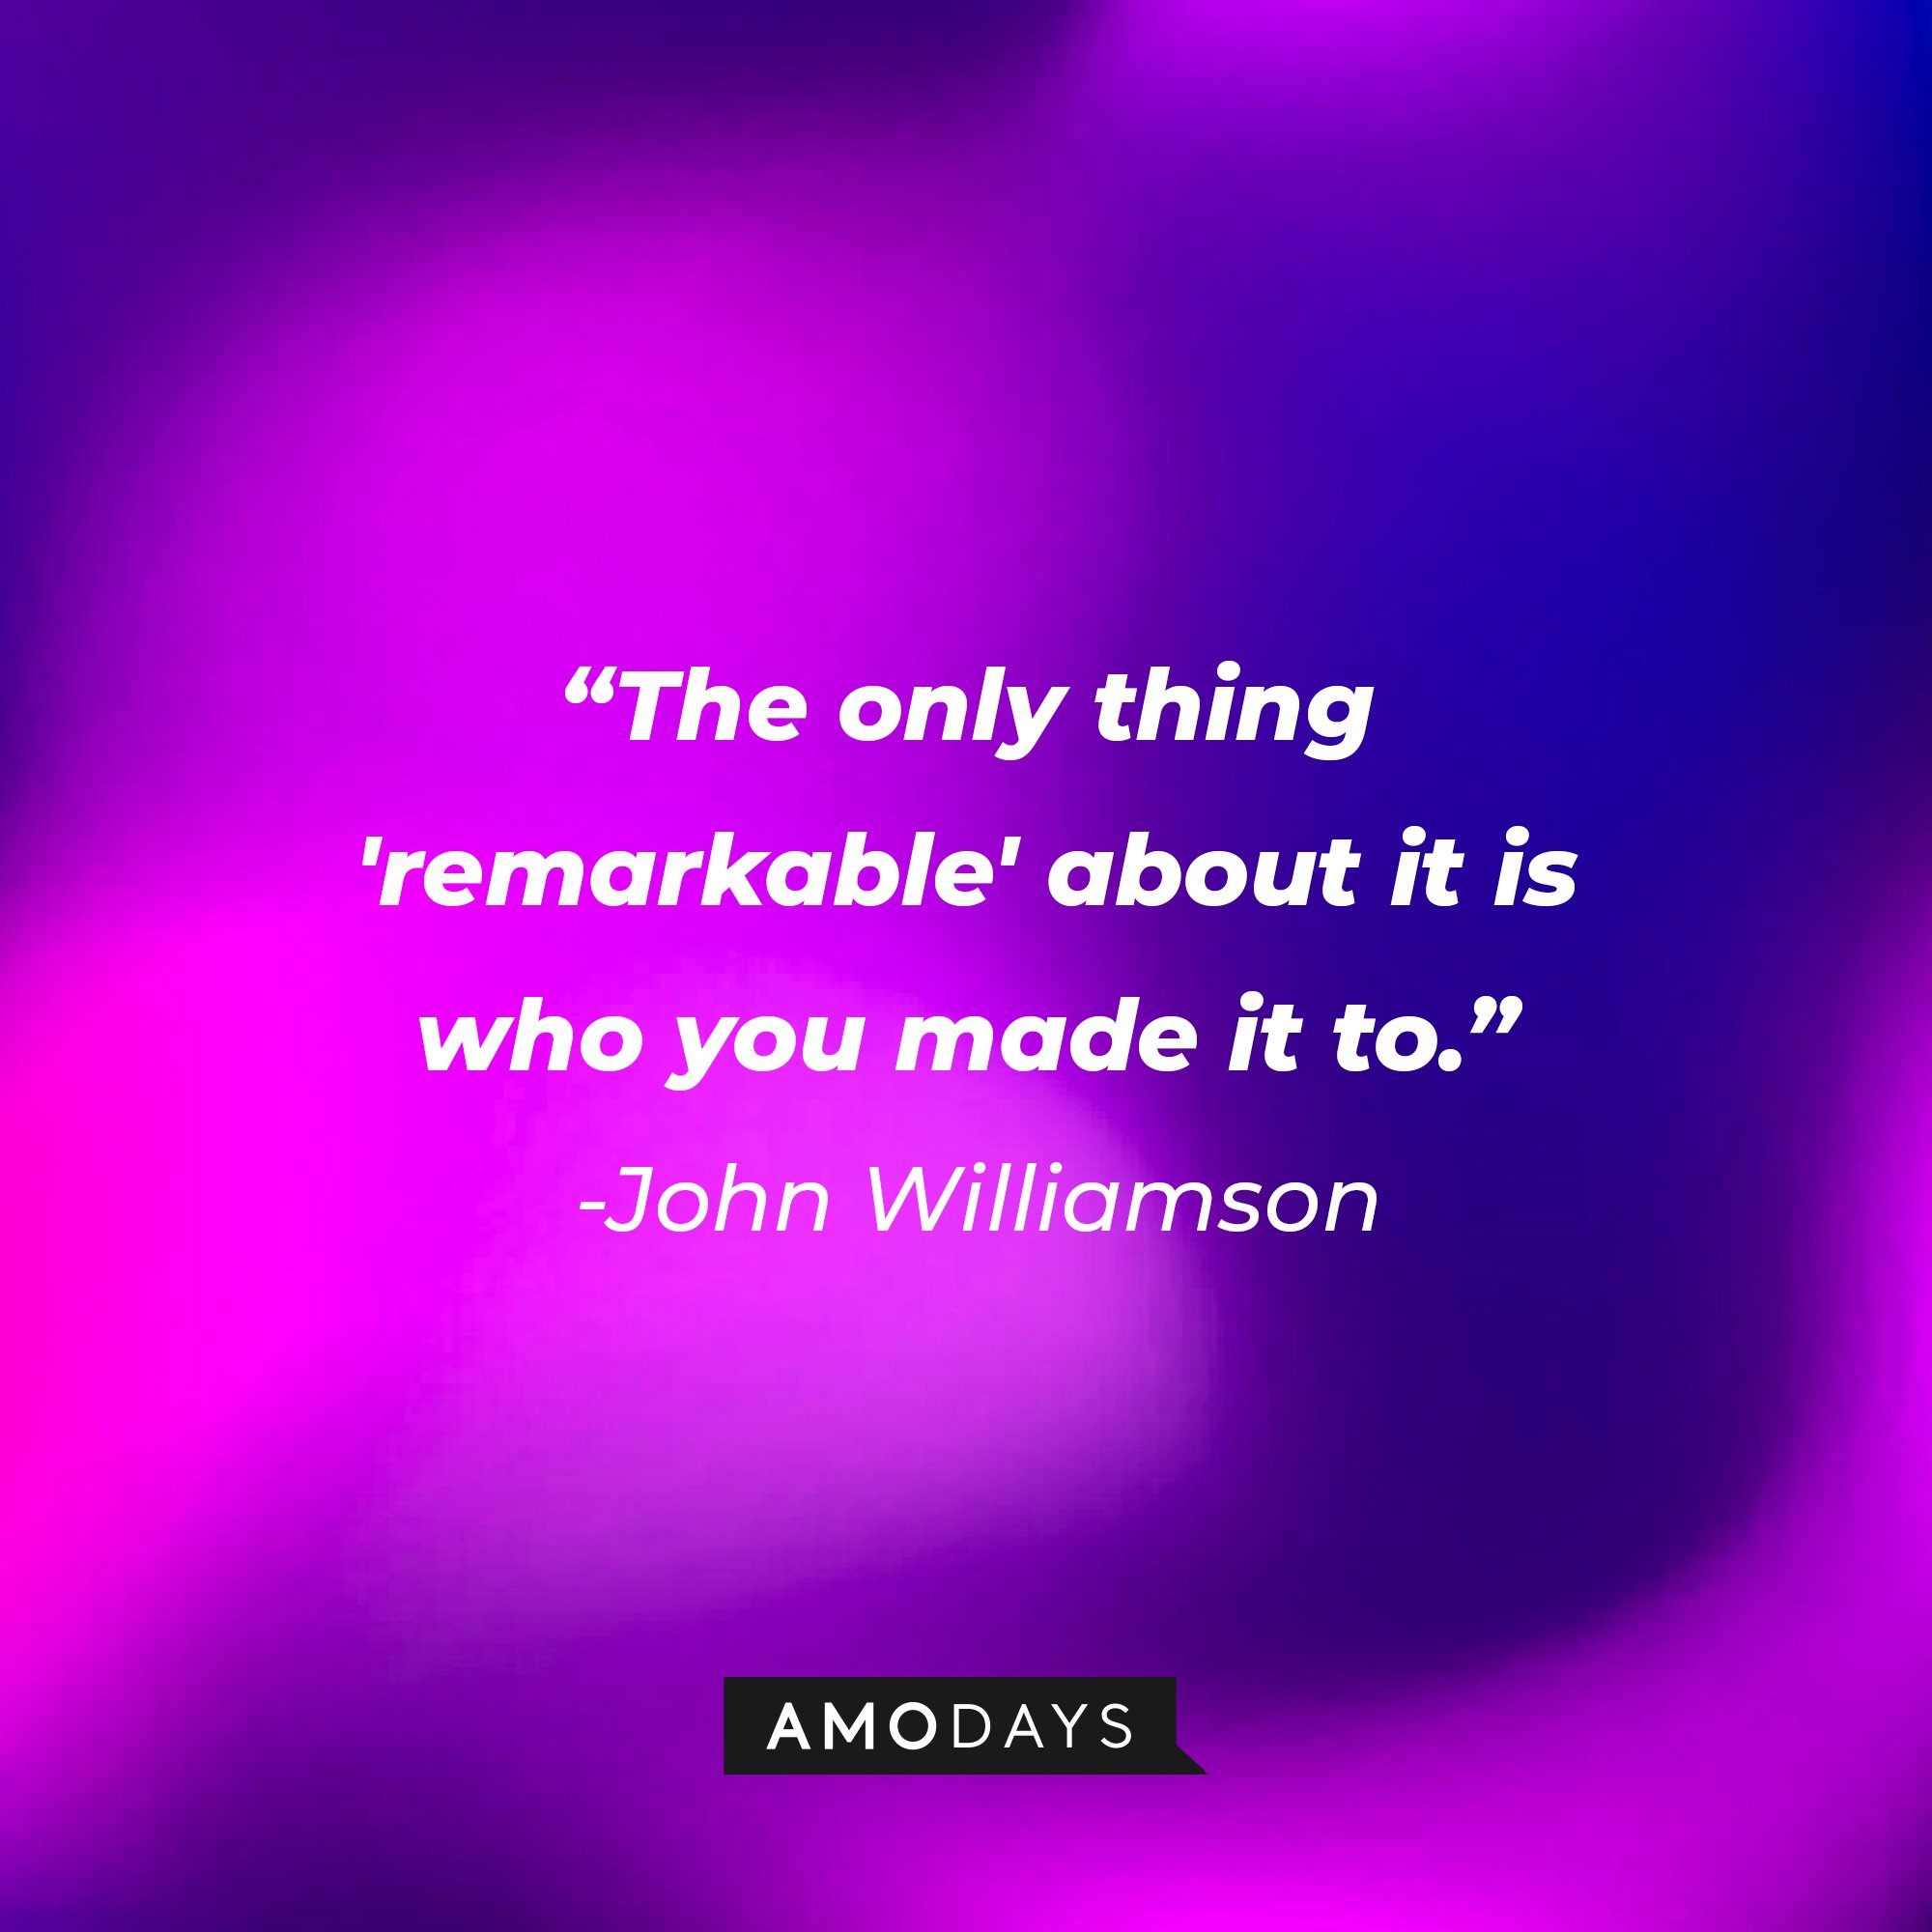  John Williamson’s quote: "The only thing 'remarkable' about it is who you made it to." | Image: AmoDays